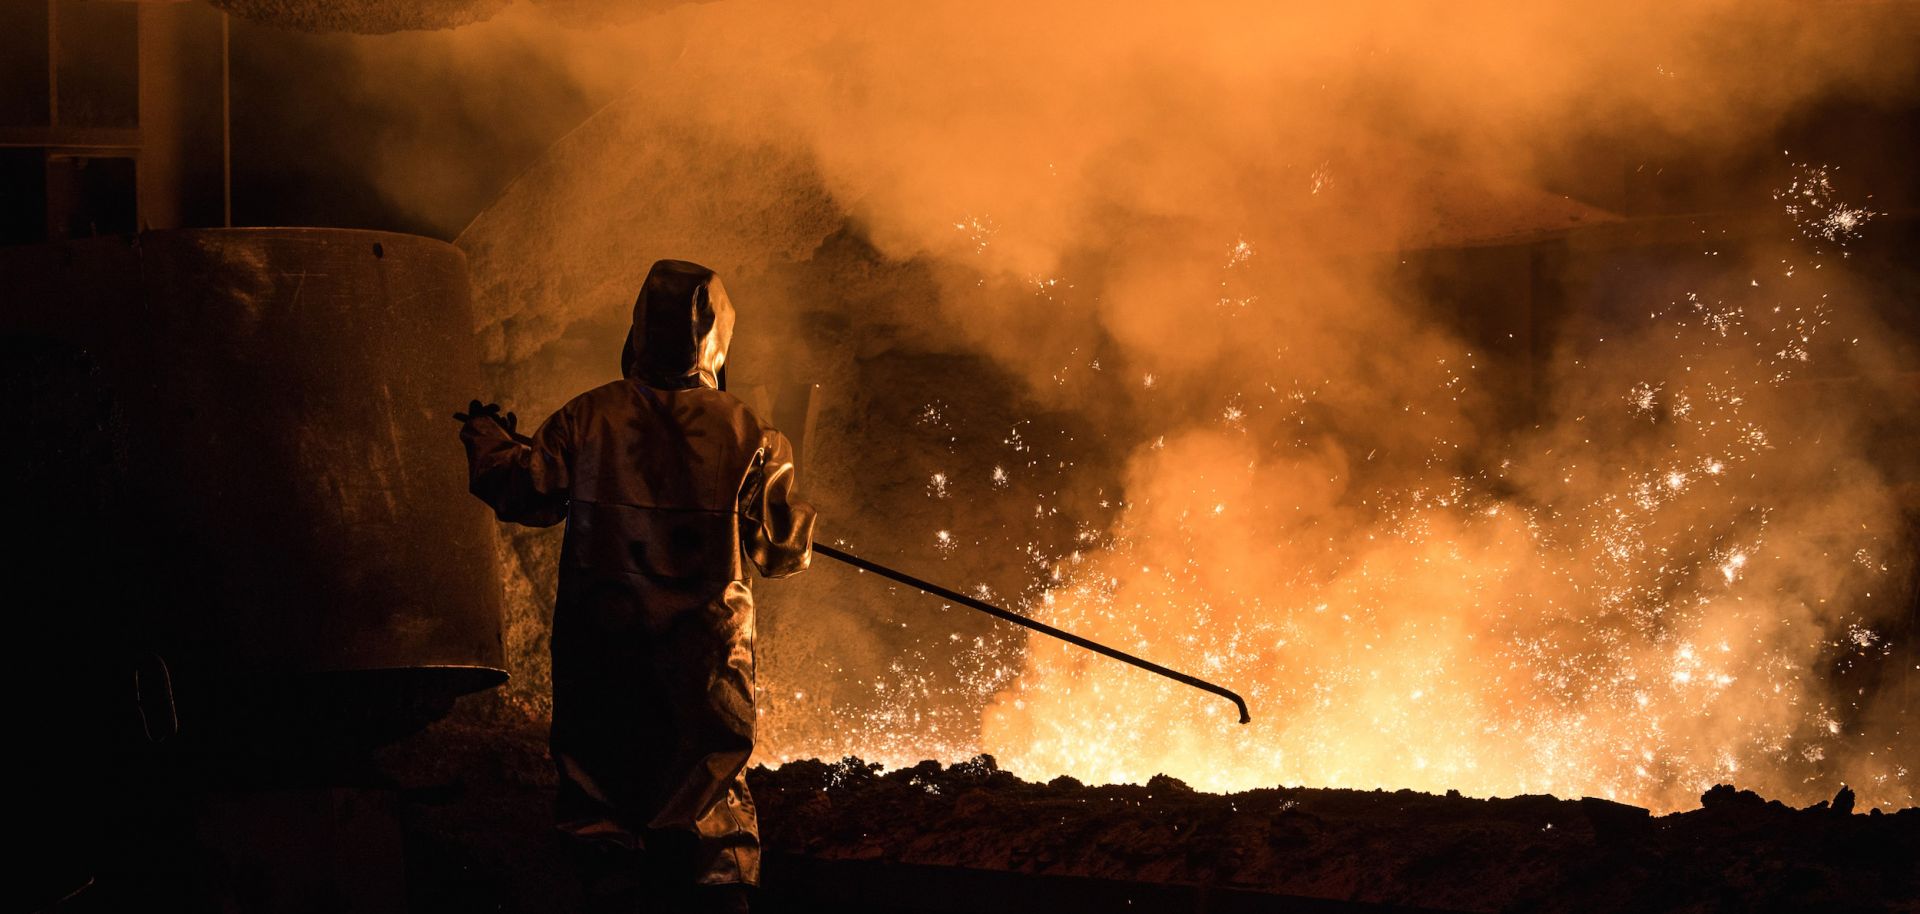 A worker in Germany oversees steel production while wearing protective gear. 